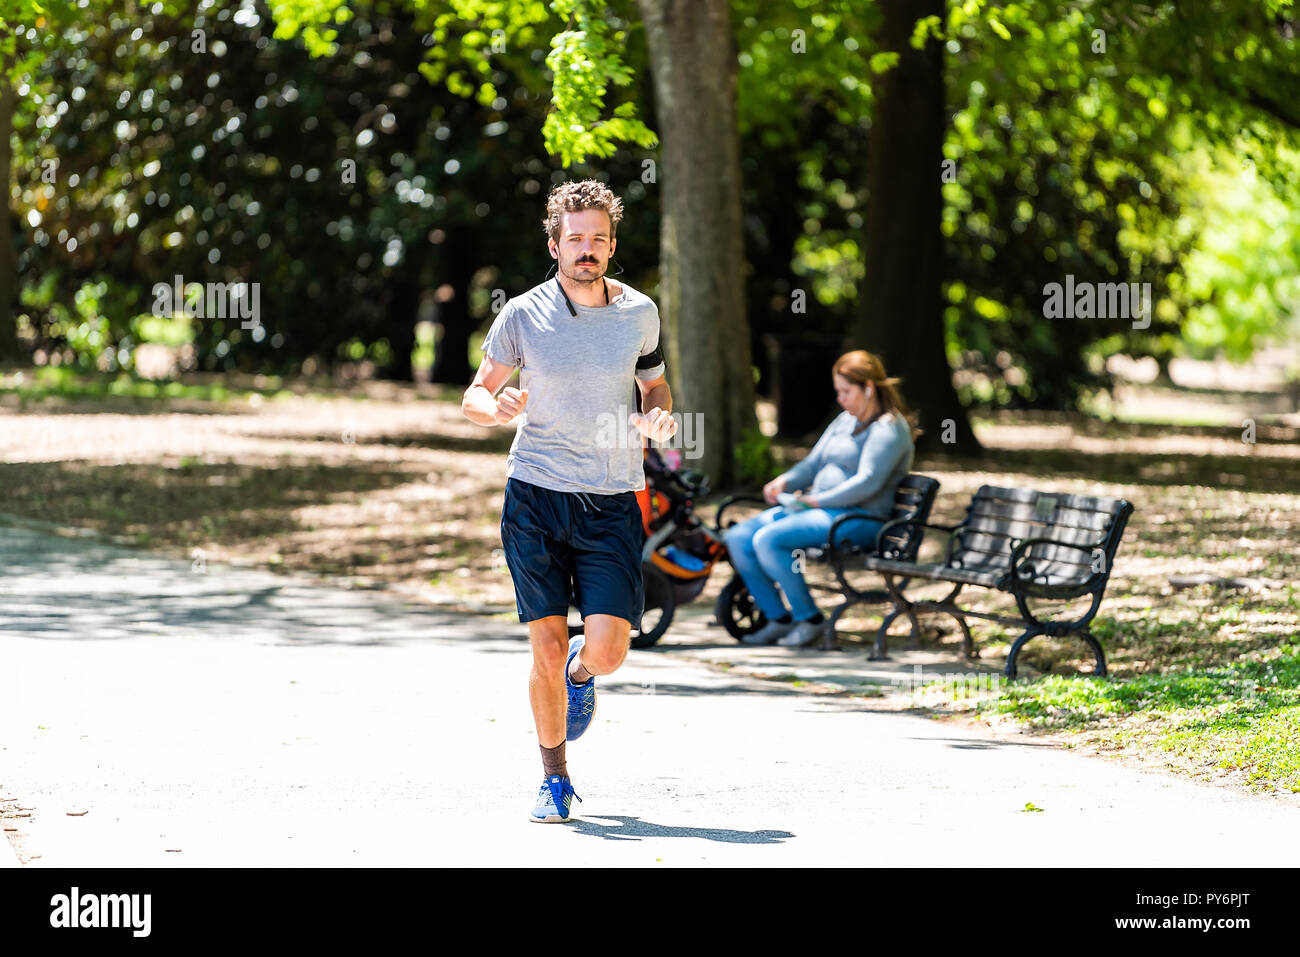 Atlanta, USA - April 20, 2018: Man running jogging on sunny bright day in shorts listening to music in Piedmont Park trail path road in Georgia city i Stock Photo